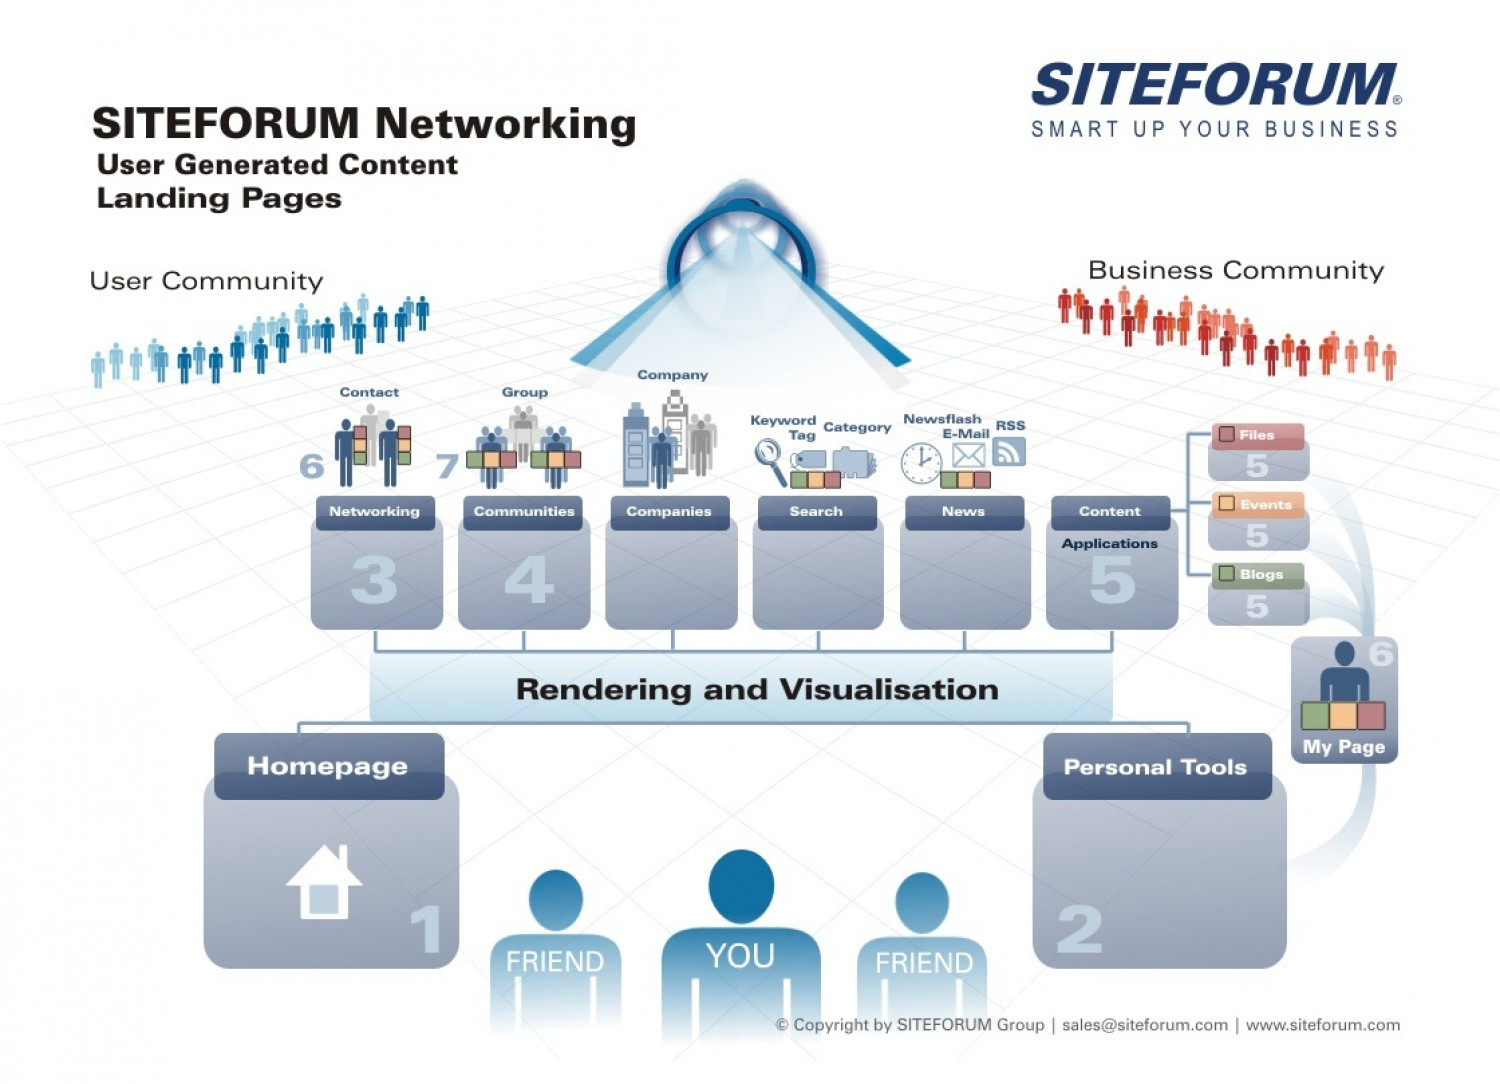 SITEFORUM Network, UGC, Landing Pages Infographic